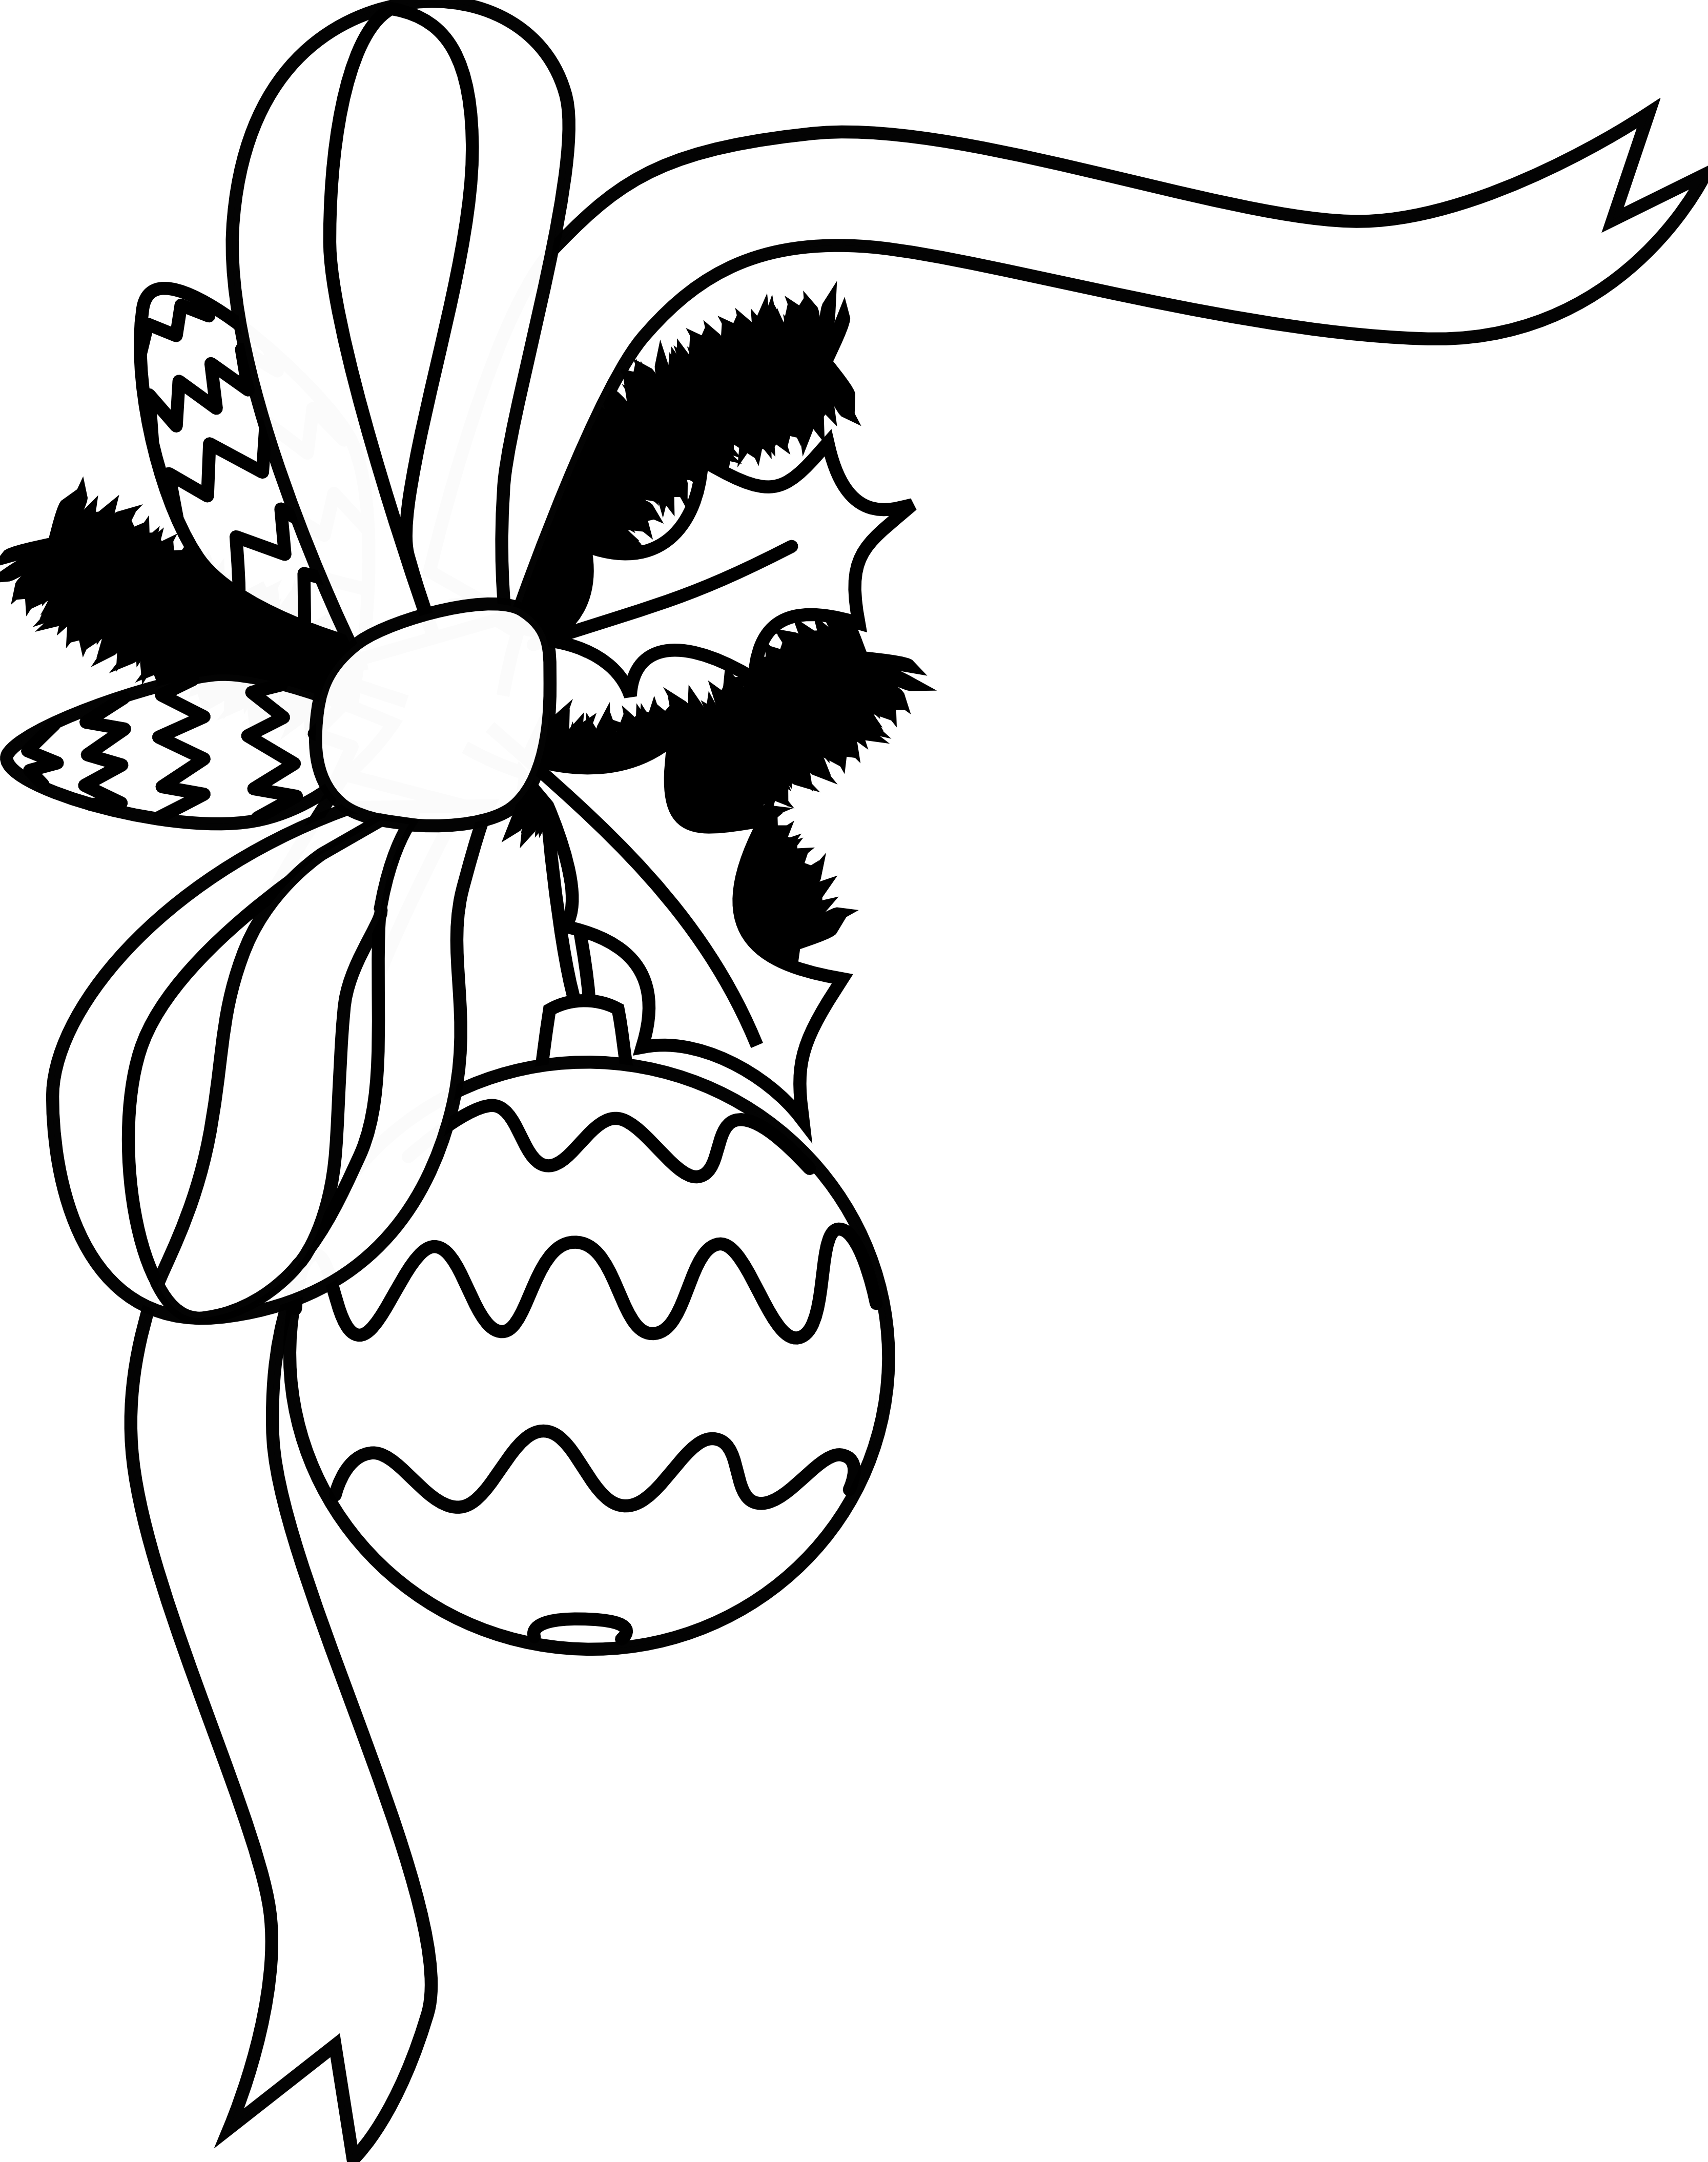 Wagon clipart coloring page. Free christmas black and